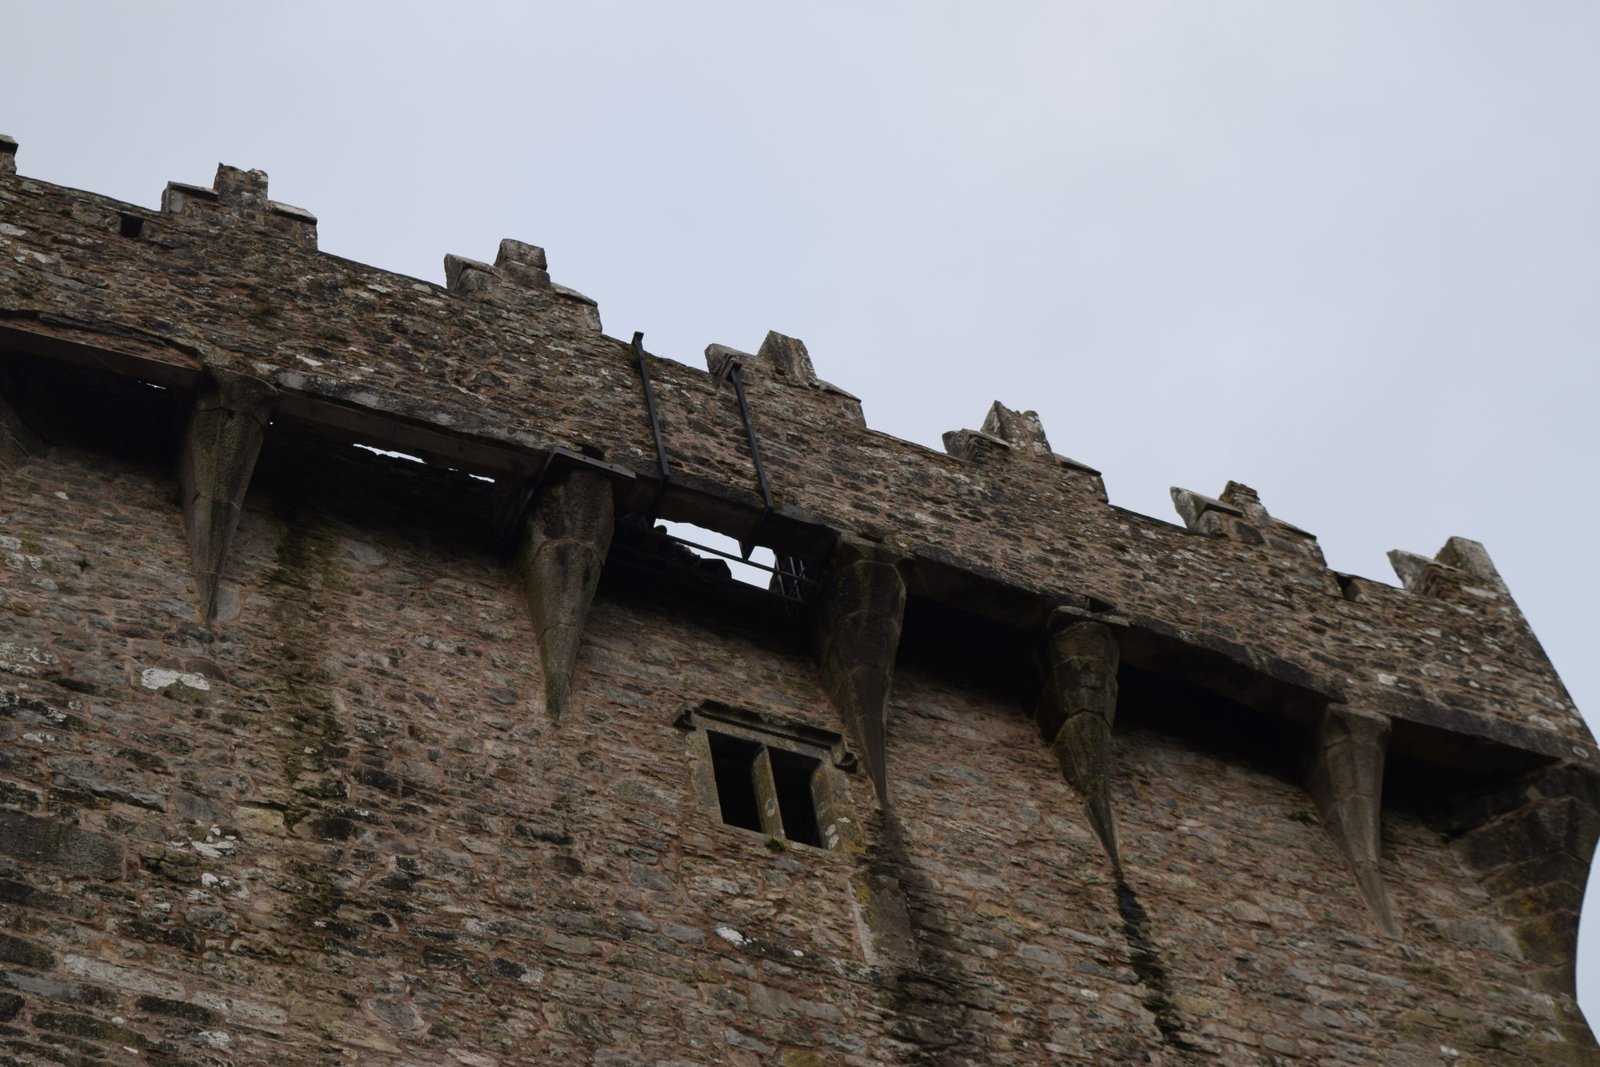 Blarney stone and castle in Cork, Ireland; what you need to know and a little history. ouritlianjourney.com; https://ouritalianjourney.com/blarney-stone-and-castle